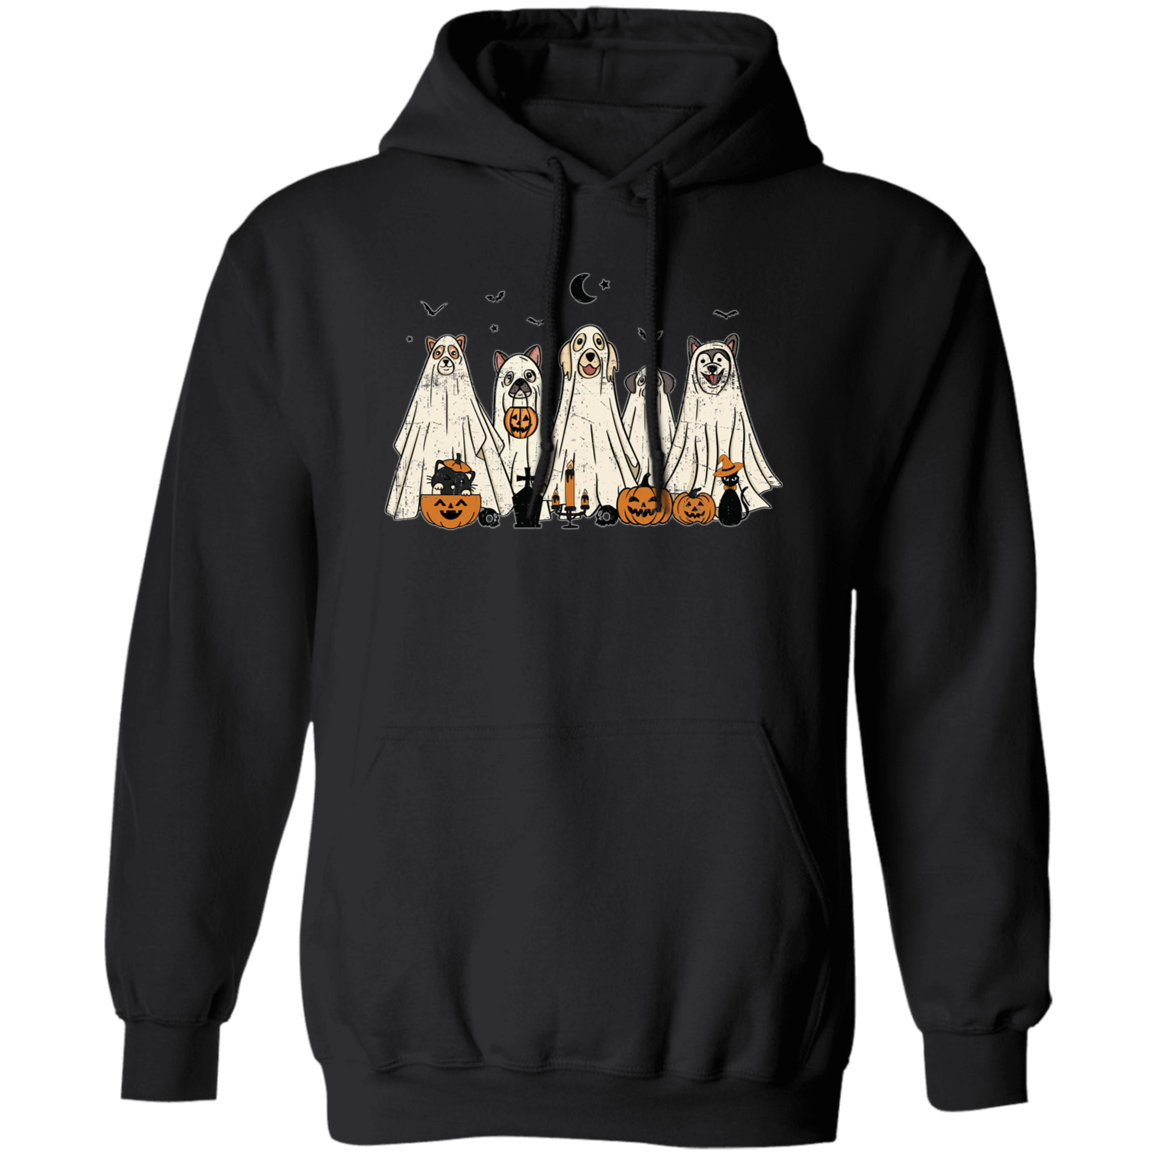 Trick or Treat Spooky Canine Crew w/Black Kittens - DISTRESSED - Unisex Shirt/Hoodie